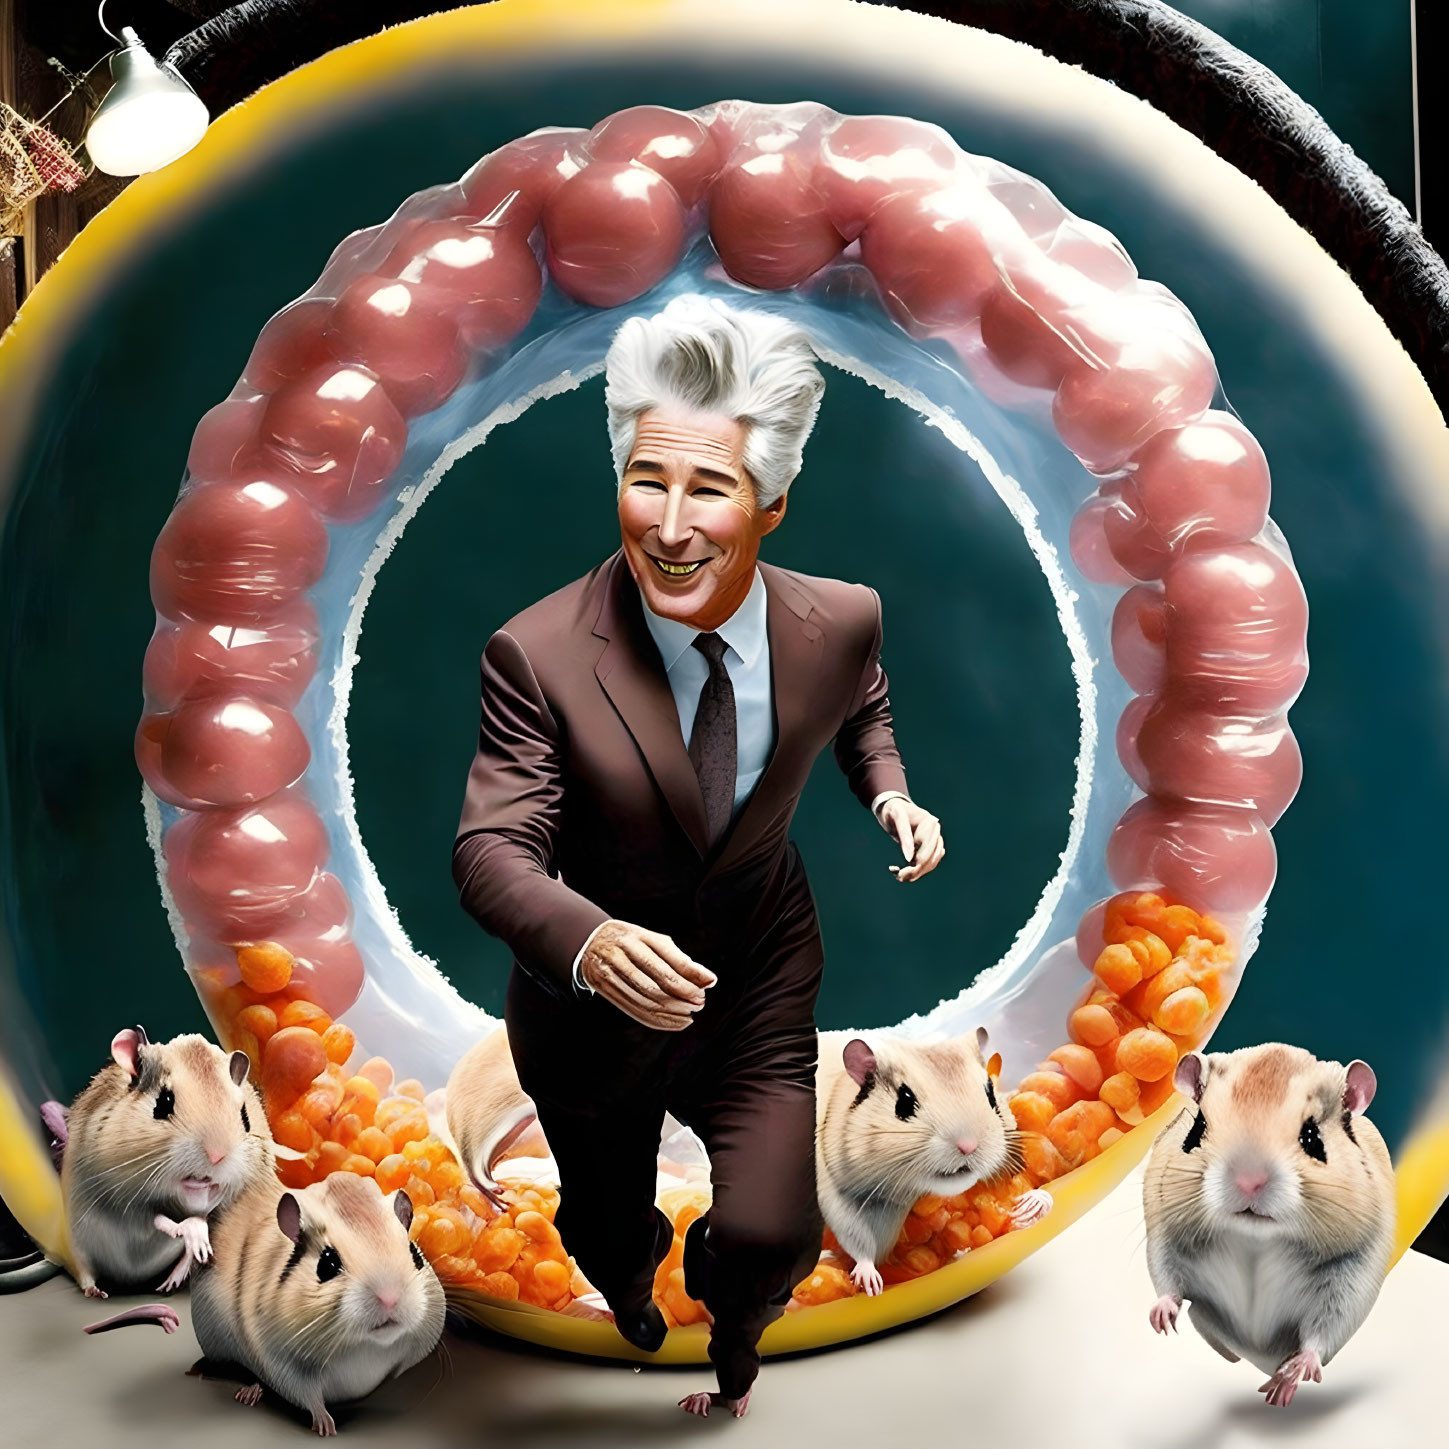 Silver-Haired Man in Brown Suit Surrounded by Oversized Food and Rodents